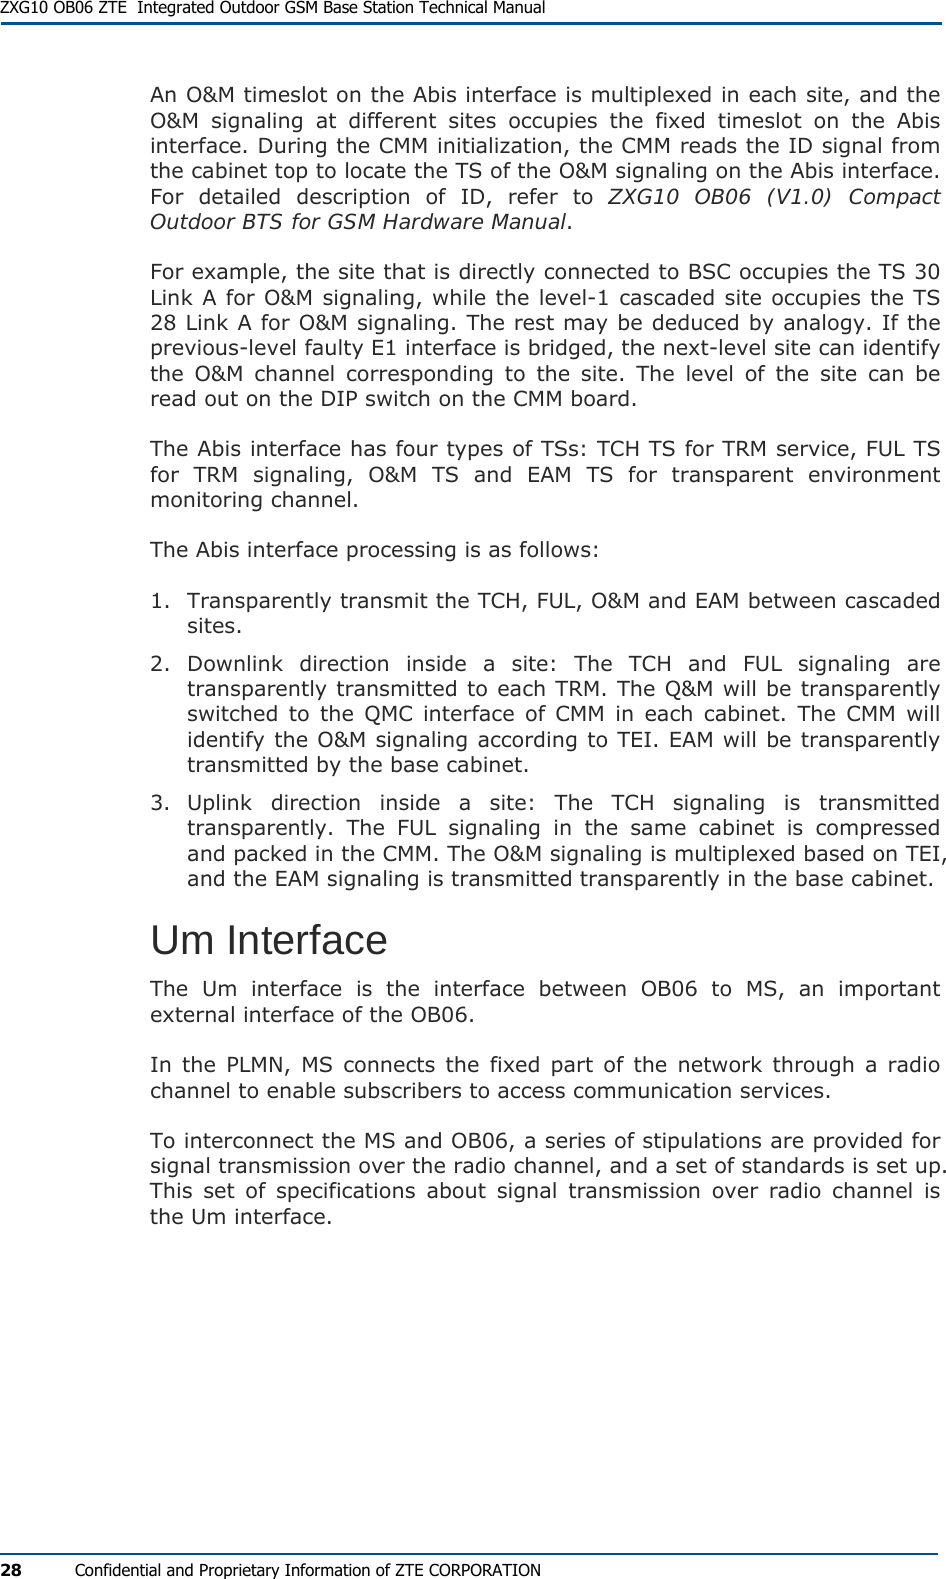  ZXG10 OB06 ZTE  Integrated Outdoor GSM Base Station Technical Manual 28  Confidential and Proprietary Information of ZTE CORPORATION An O&amp;M timeslot on the Abis interface is multiplexed in each site, and the O&amp;M signaling at different sites occupies the fixed timeslot on the Abis interface. During the CMM initialization, the CMM reads the ID signal from the cabinet top to locate the TS of the O&amp;M signaling on the Abis interface. For detailed description of ID, refer to ZXG10 OB06 (V1.0) Compact Outdoor BTS for GSM Hardware Manual. For example, the site that is directly connected to BSC occupies the TS 30 Link A for O&amp;M signaling, while the level-1 cascaded site occupies the TS 28 Link A for O&amp;M signaling. The rest may be deduced by analogy. If the previous-level faulty E1 interface is bridged, the next-level site can identify the O&amp;M channel corresponding to the site. The level of the site can be read out on the DIP switch on the CMM board. The Abis interface has four types of TSs: TCH TS for TRM service, FUL TS for TRM signaling, O&amp;M TS and EAM TS for transparent environment monitoring channel. The Abis interface processing is as follows: 1. Transparently transmit the TCH, FUL, O&amp;M and EAM between cascaded sites. 2. Downlink direction inside a site: The TCH and FUL signaling are transparently transmitted to each TRM. The Q&amp;M will be transparently switched to the QMC interface of CMM in each cabinet. The CMM will identify the O&amp;M signaling according to TEI. EAM will be transparently transmitted by the base cabinet. 3. Uplink direction inside a site: The TCH signaling is transmitted transparently. The FUL signaling in the same cabinet is compressed and packed in the CMM. The O&amp;M signaling is multiplexed based on TEI, and the EAM signaling is transmitted transparently in the base cabinet. Um Interface The Um interface is the interface between OB06 to MS, an important external interface of the OB06. In the PLMN, MS connects the fixed part of the network through a radio channel to enable subscribers to access communication services. To interconnect the MS and OB06, a series of stipulations are provided for signal transmission over the radio channel, and a set of standards is set up. This set of specifications about signal transmission over radio channel is the Um interface. 